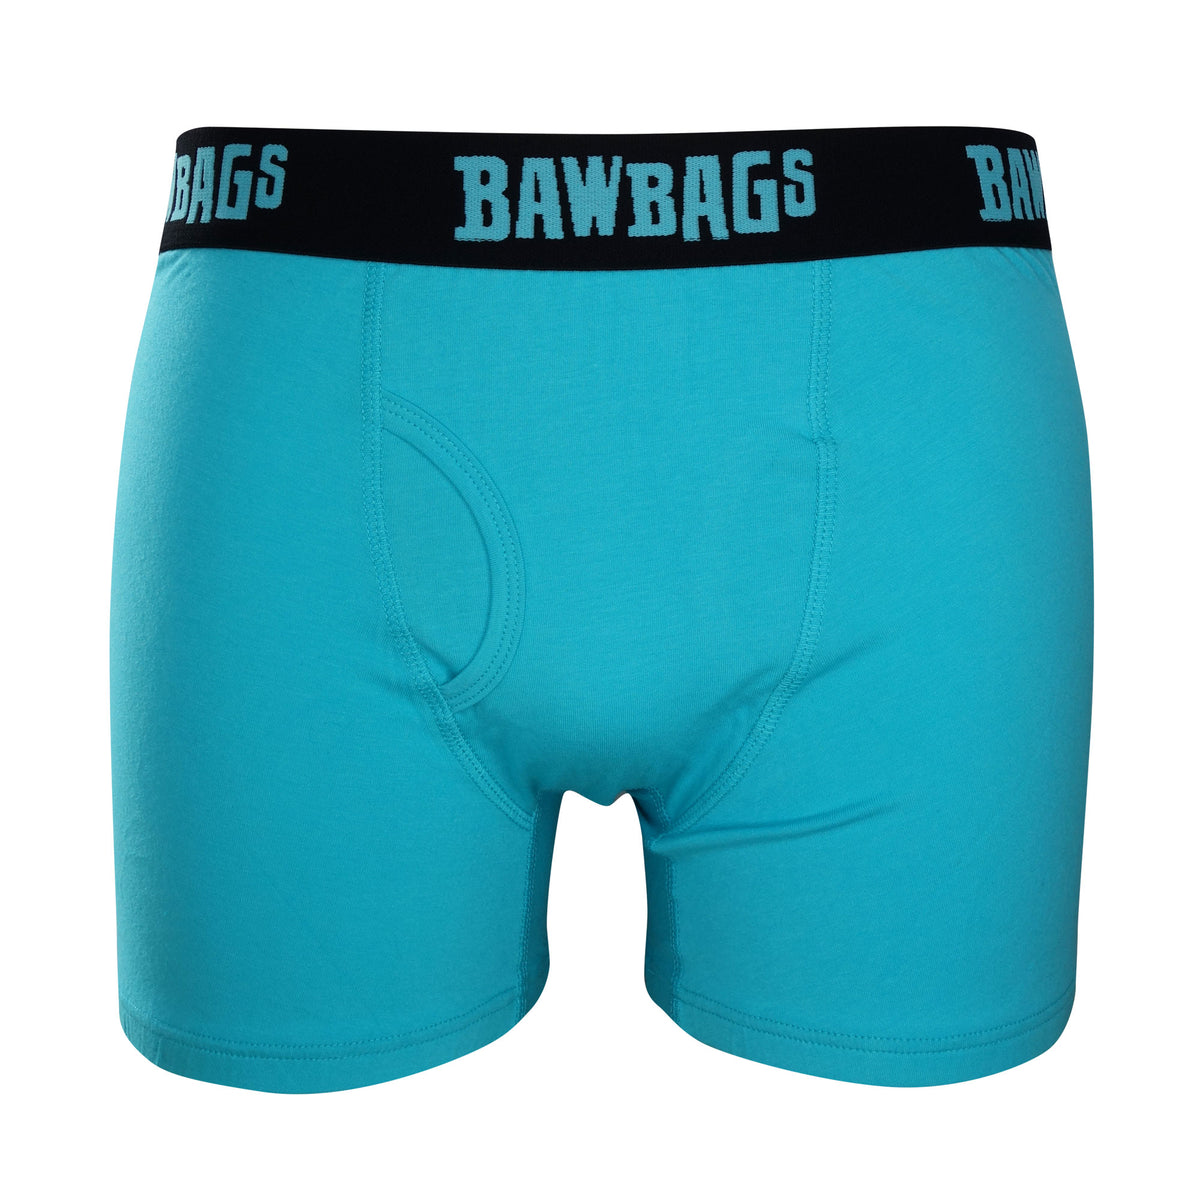 Bright Baws 3-Pack Cotton Boxer Shorts - Bawbags